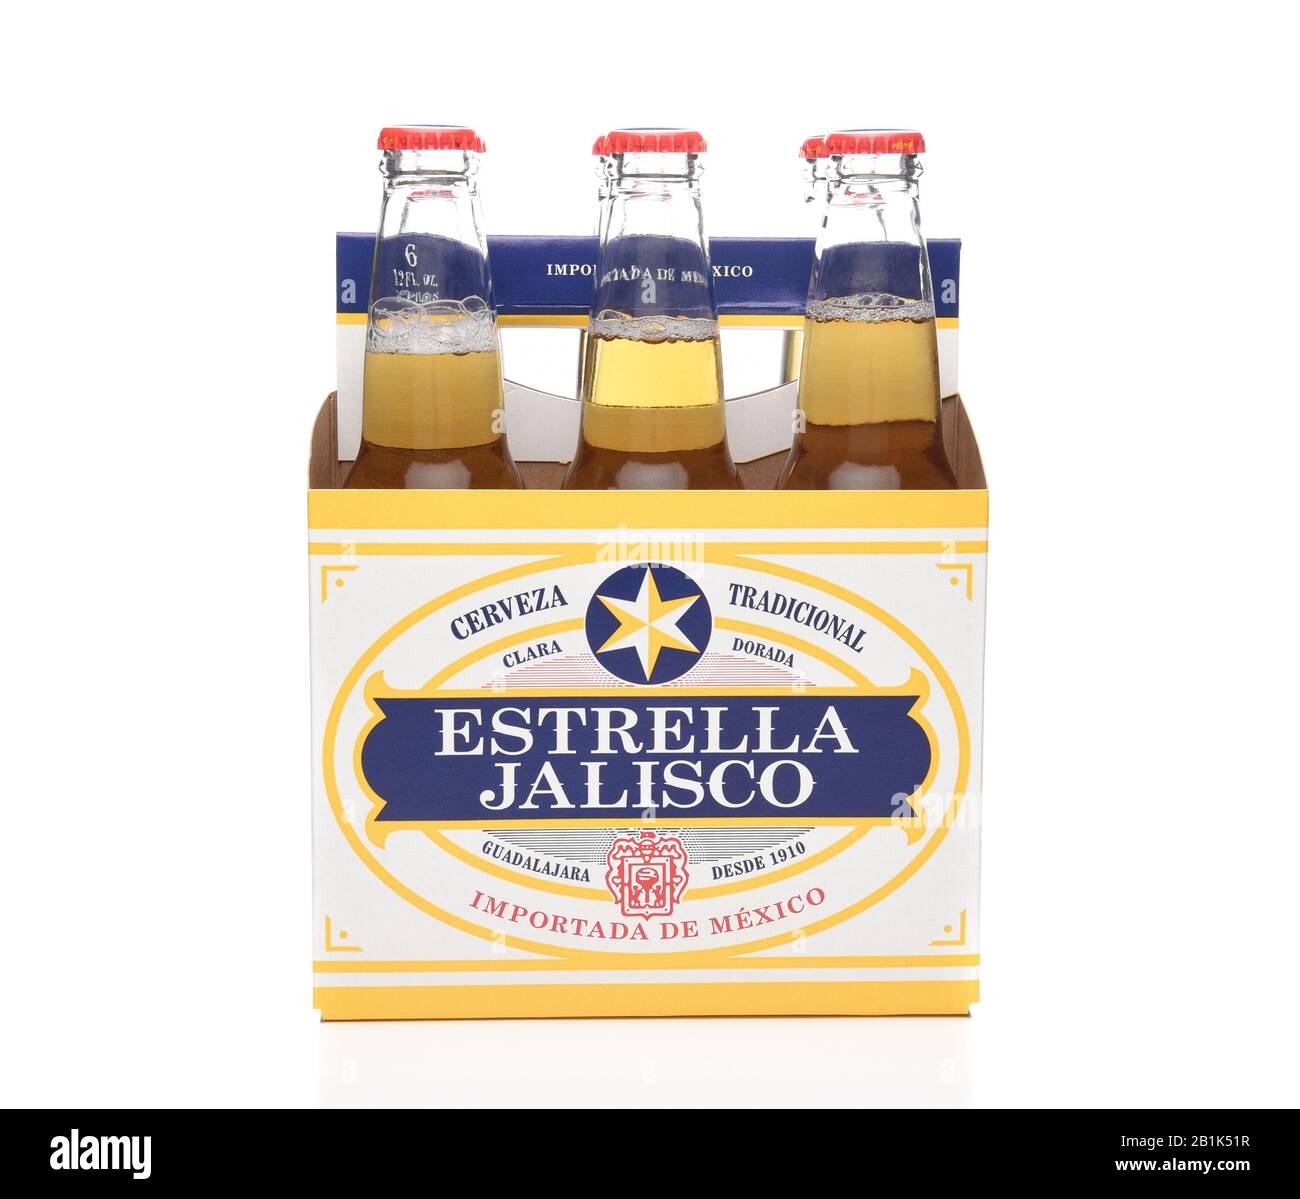 IRVINE, CALIFORNIA - MARCH 21, 2018: Six pack of Estrella Jalisco Beer side view. Estrella Jalisco is a American Lager style beer brewed by Grupo Mode Stock Photo